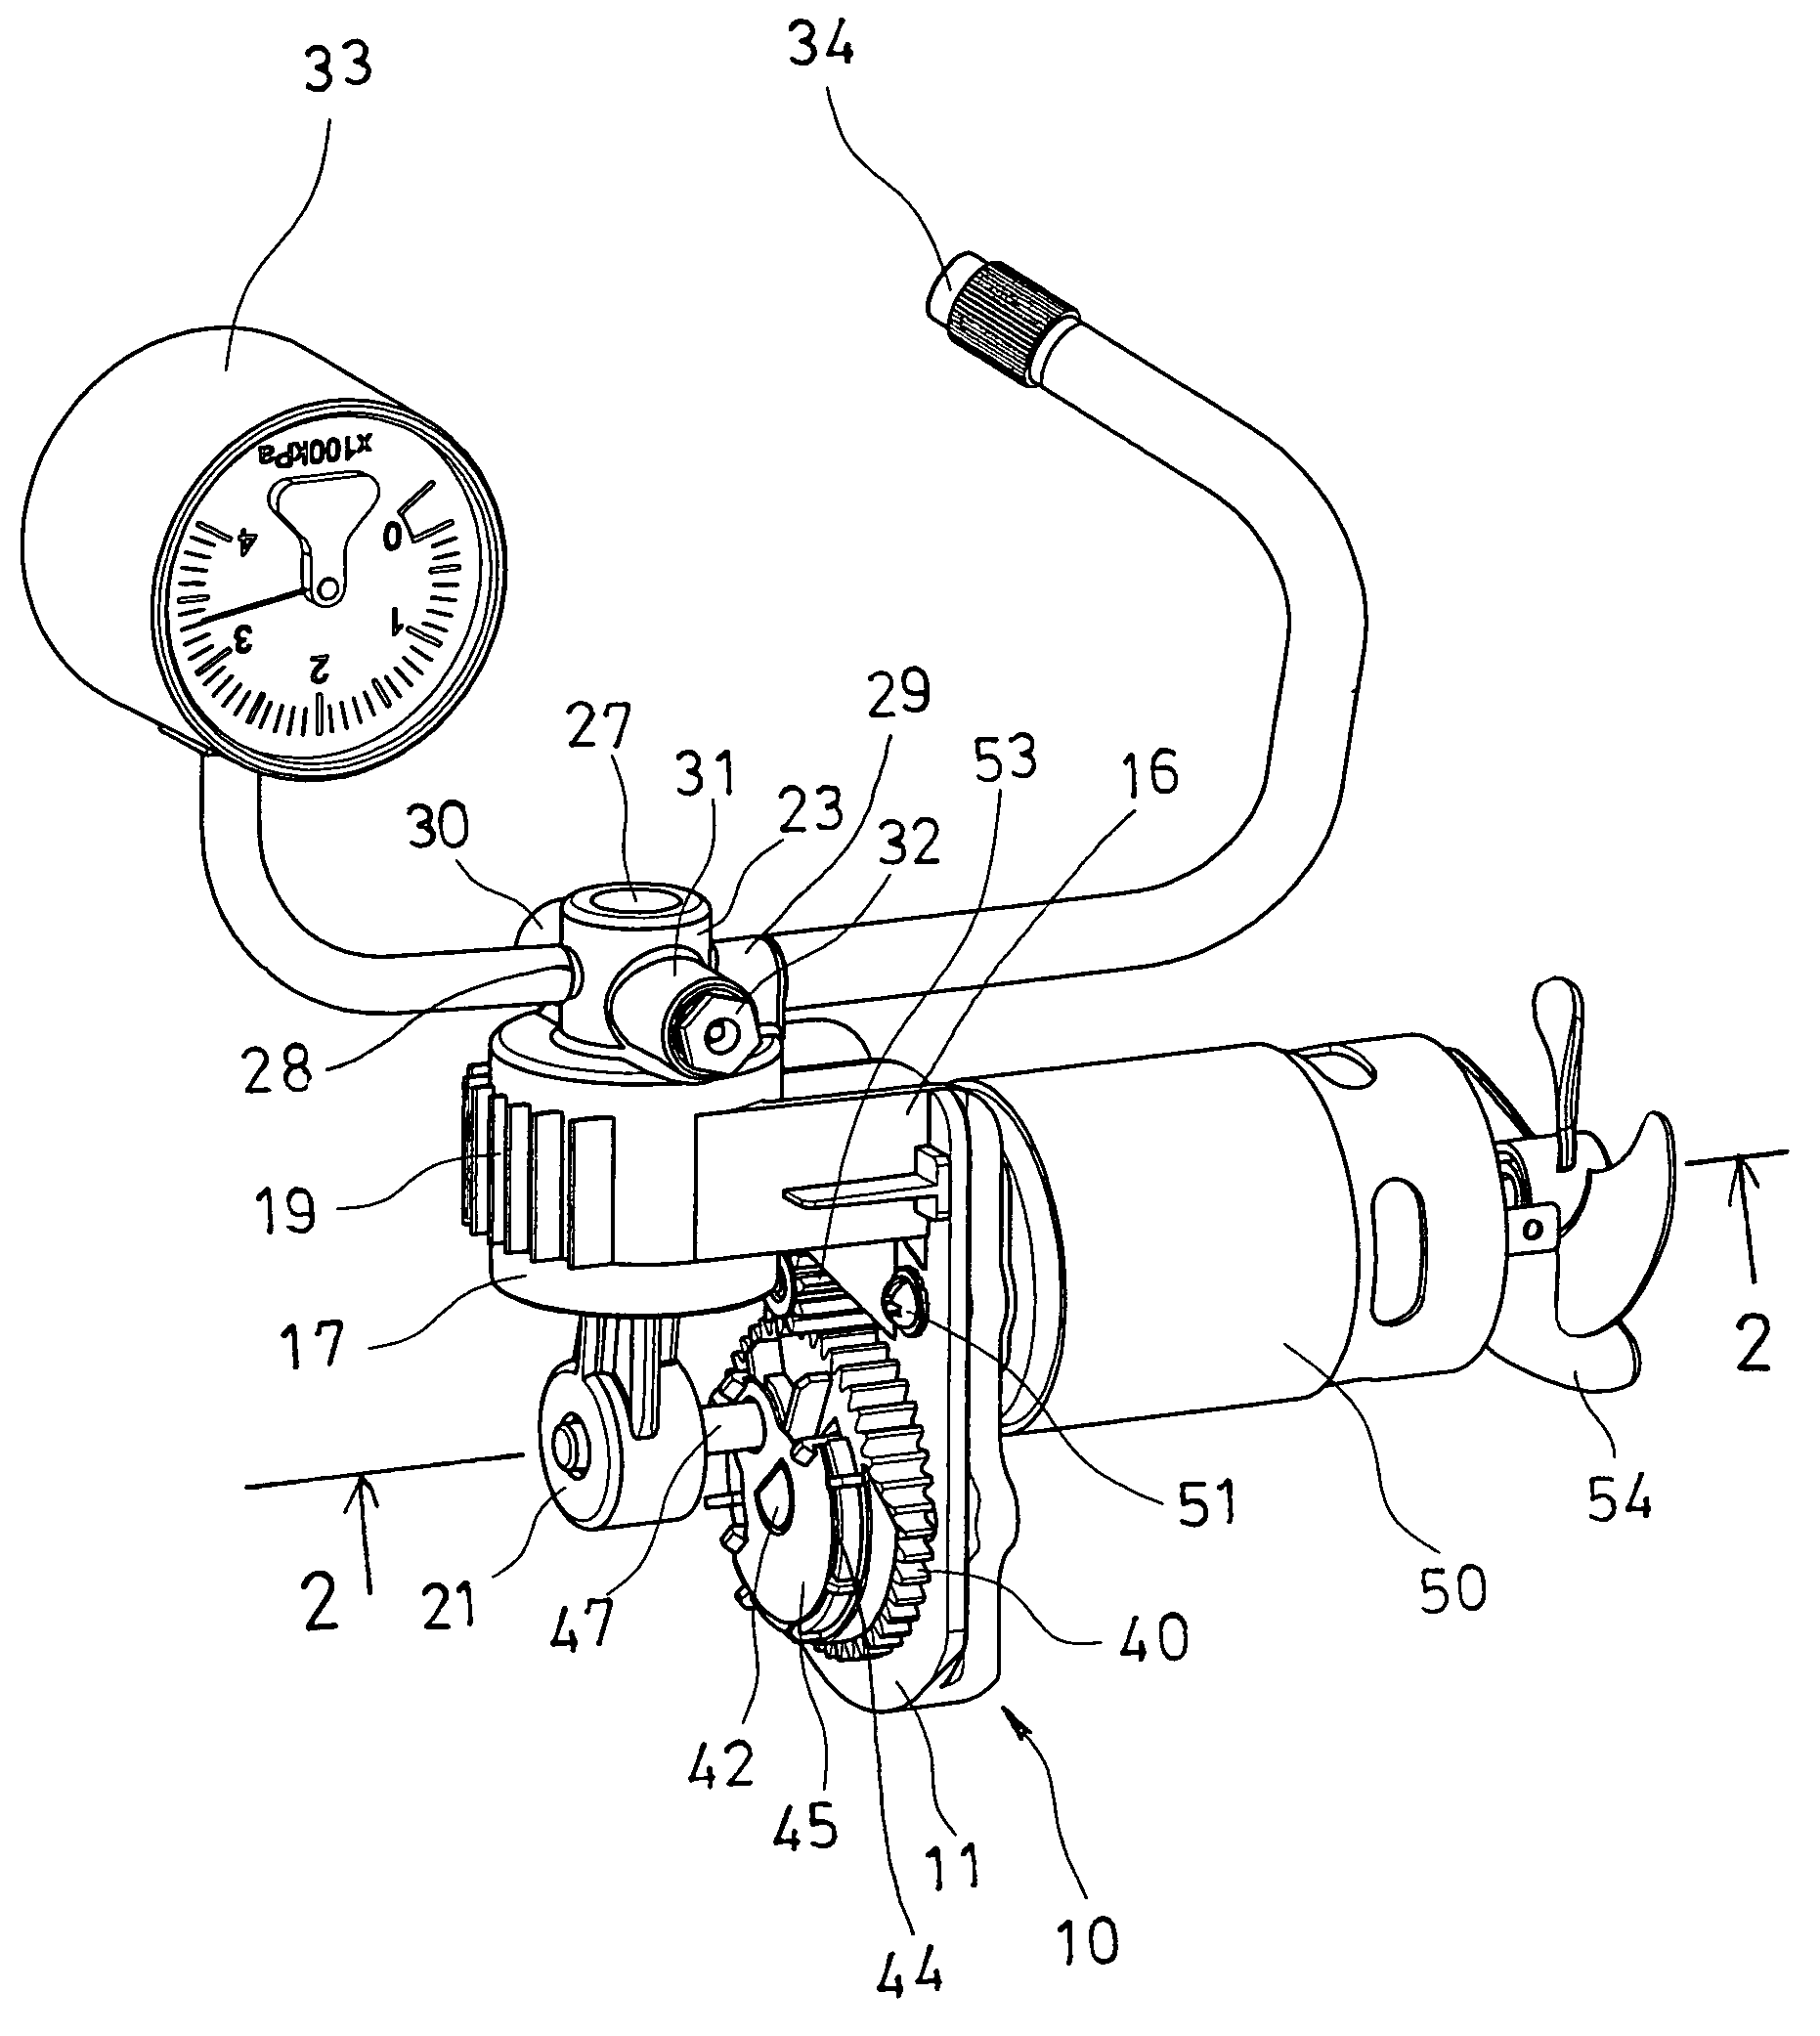 Air compressor having stable configuration